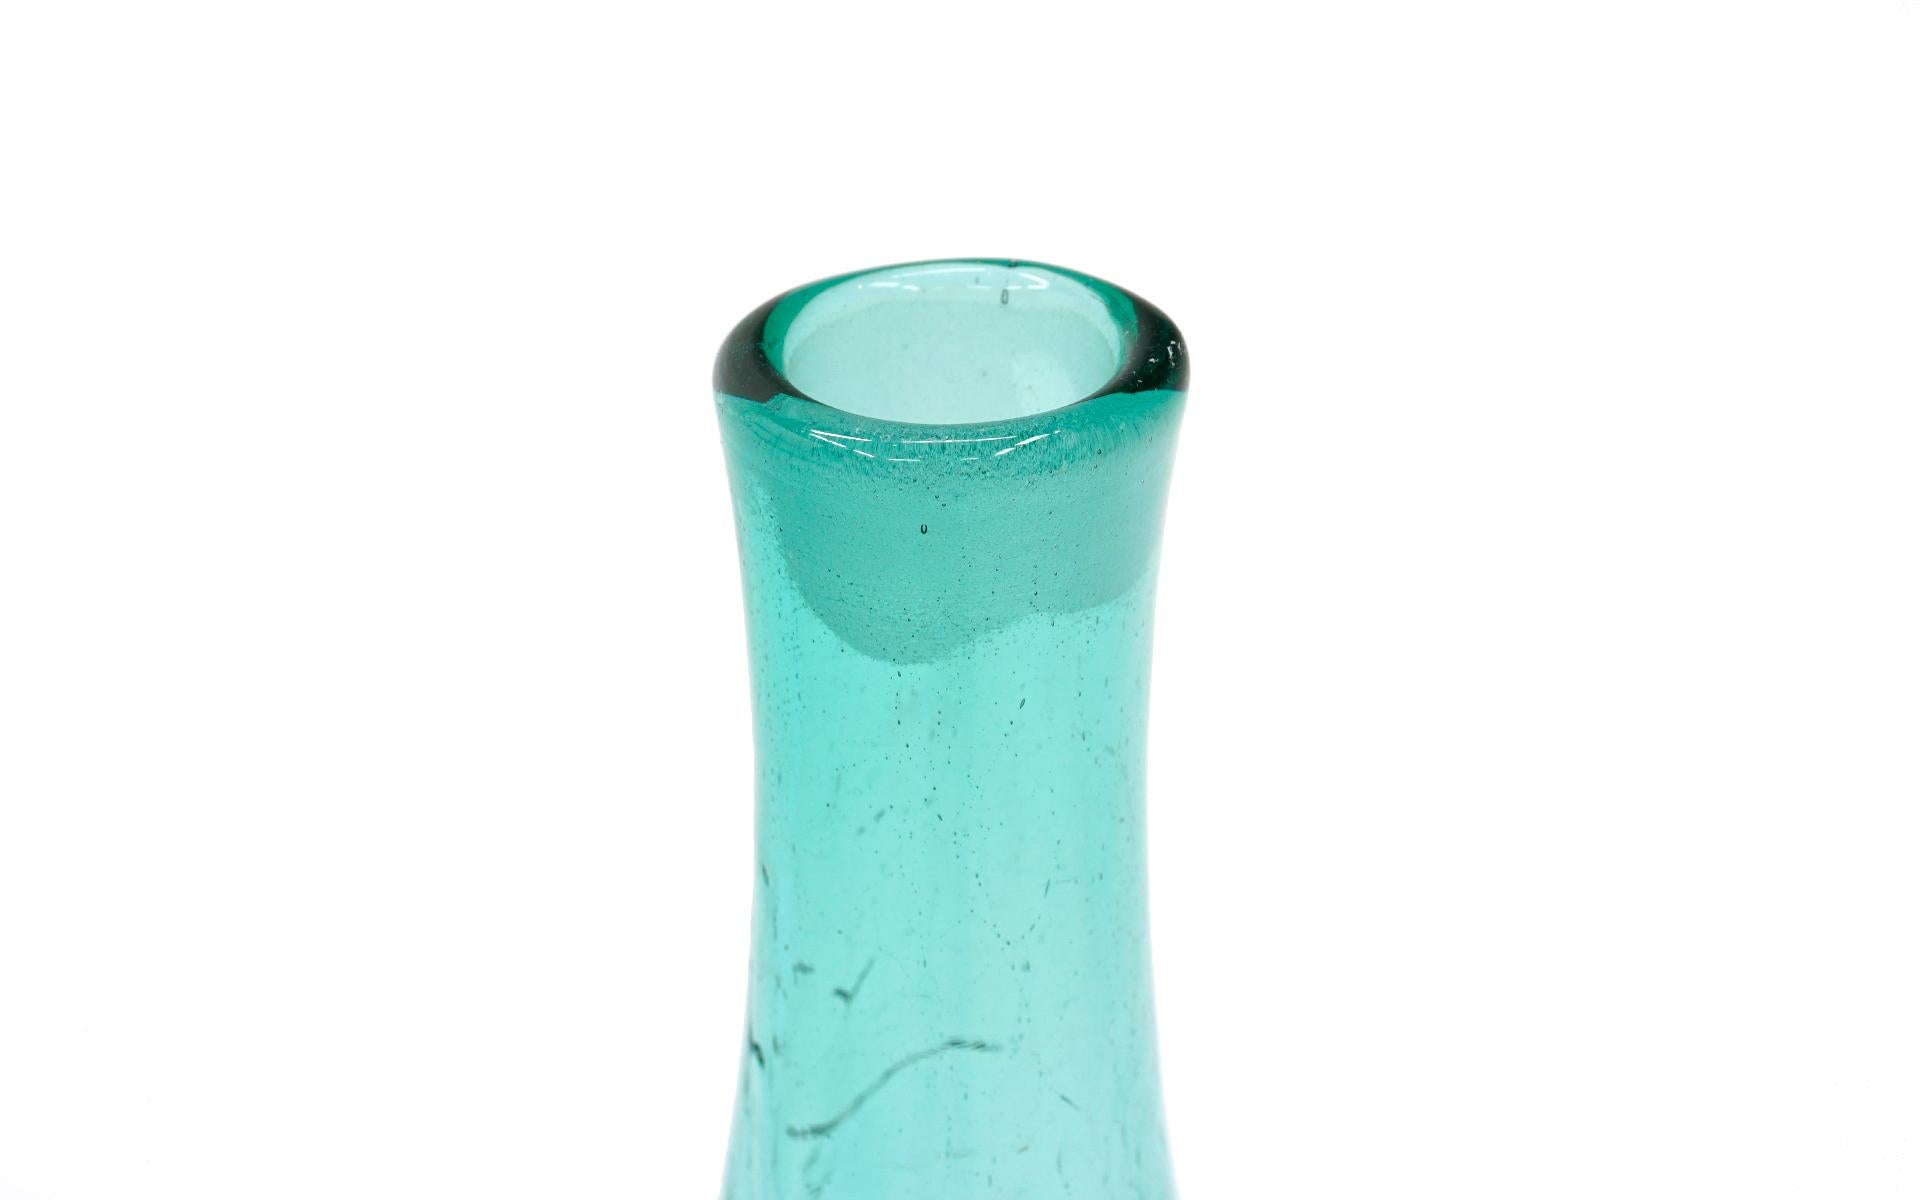 Mid-20th Century Tall Blenko Green Crackle Glass Decanter with Original Stopper, Mint Conditon